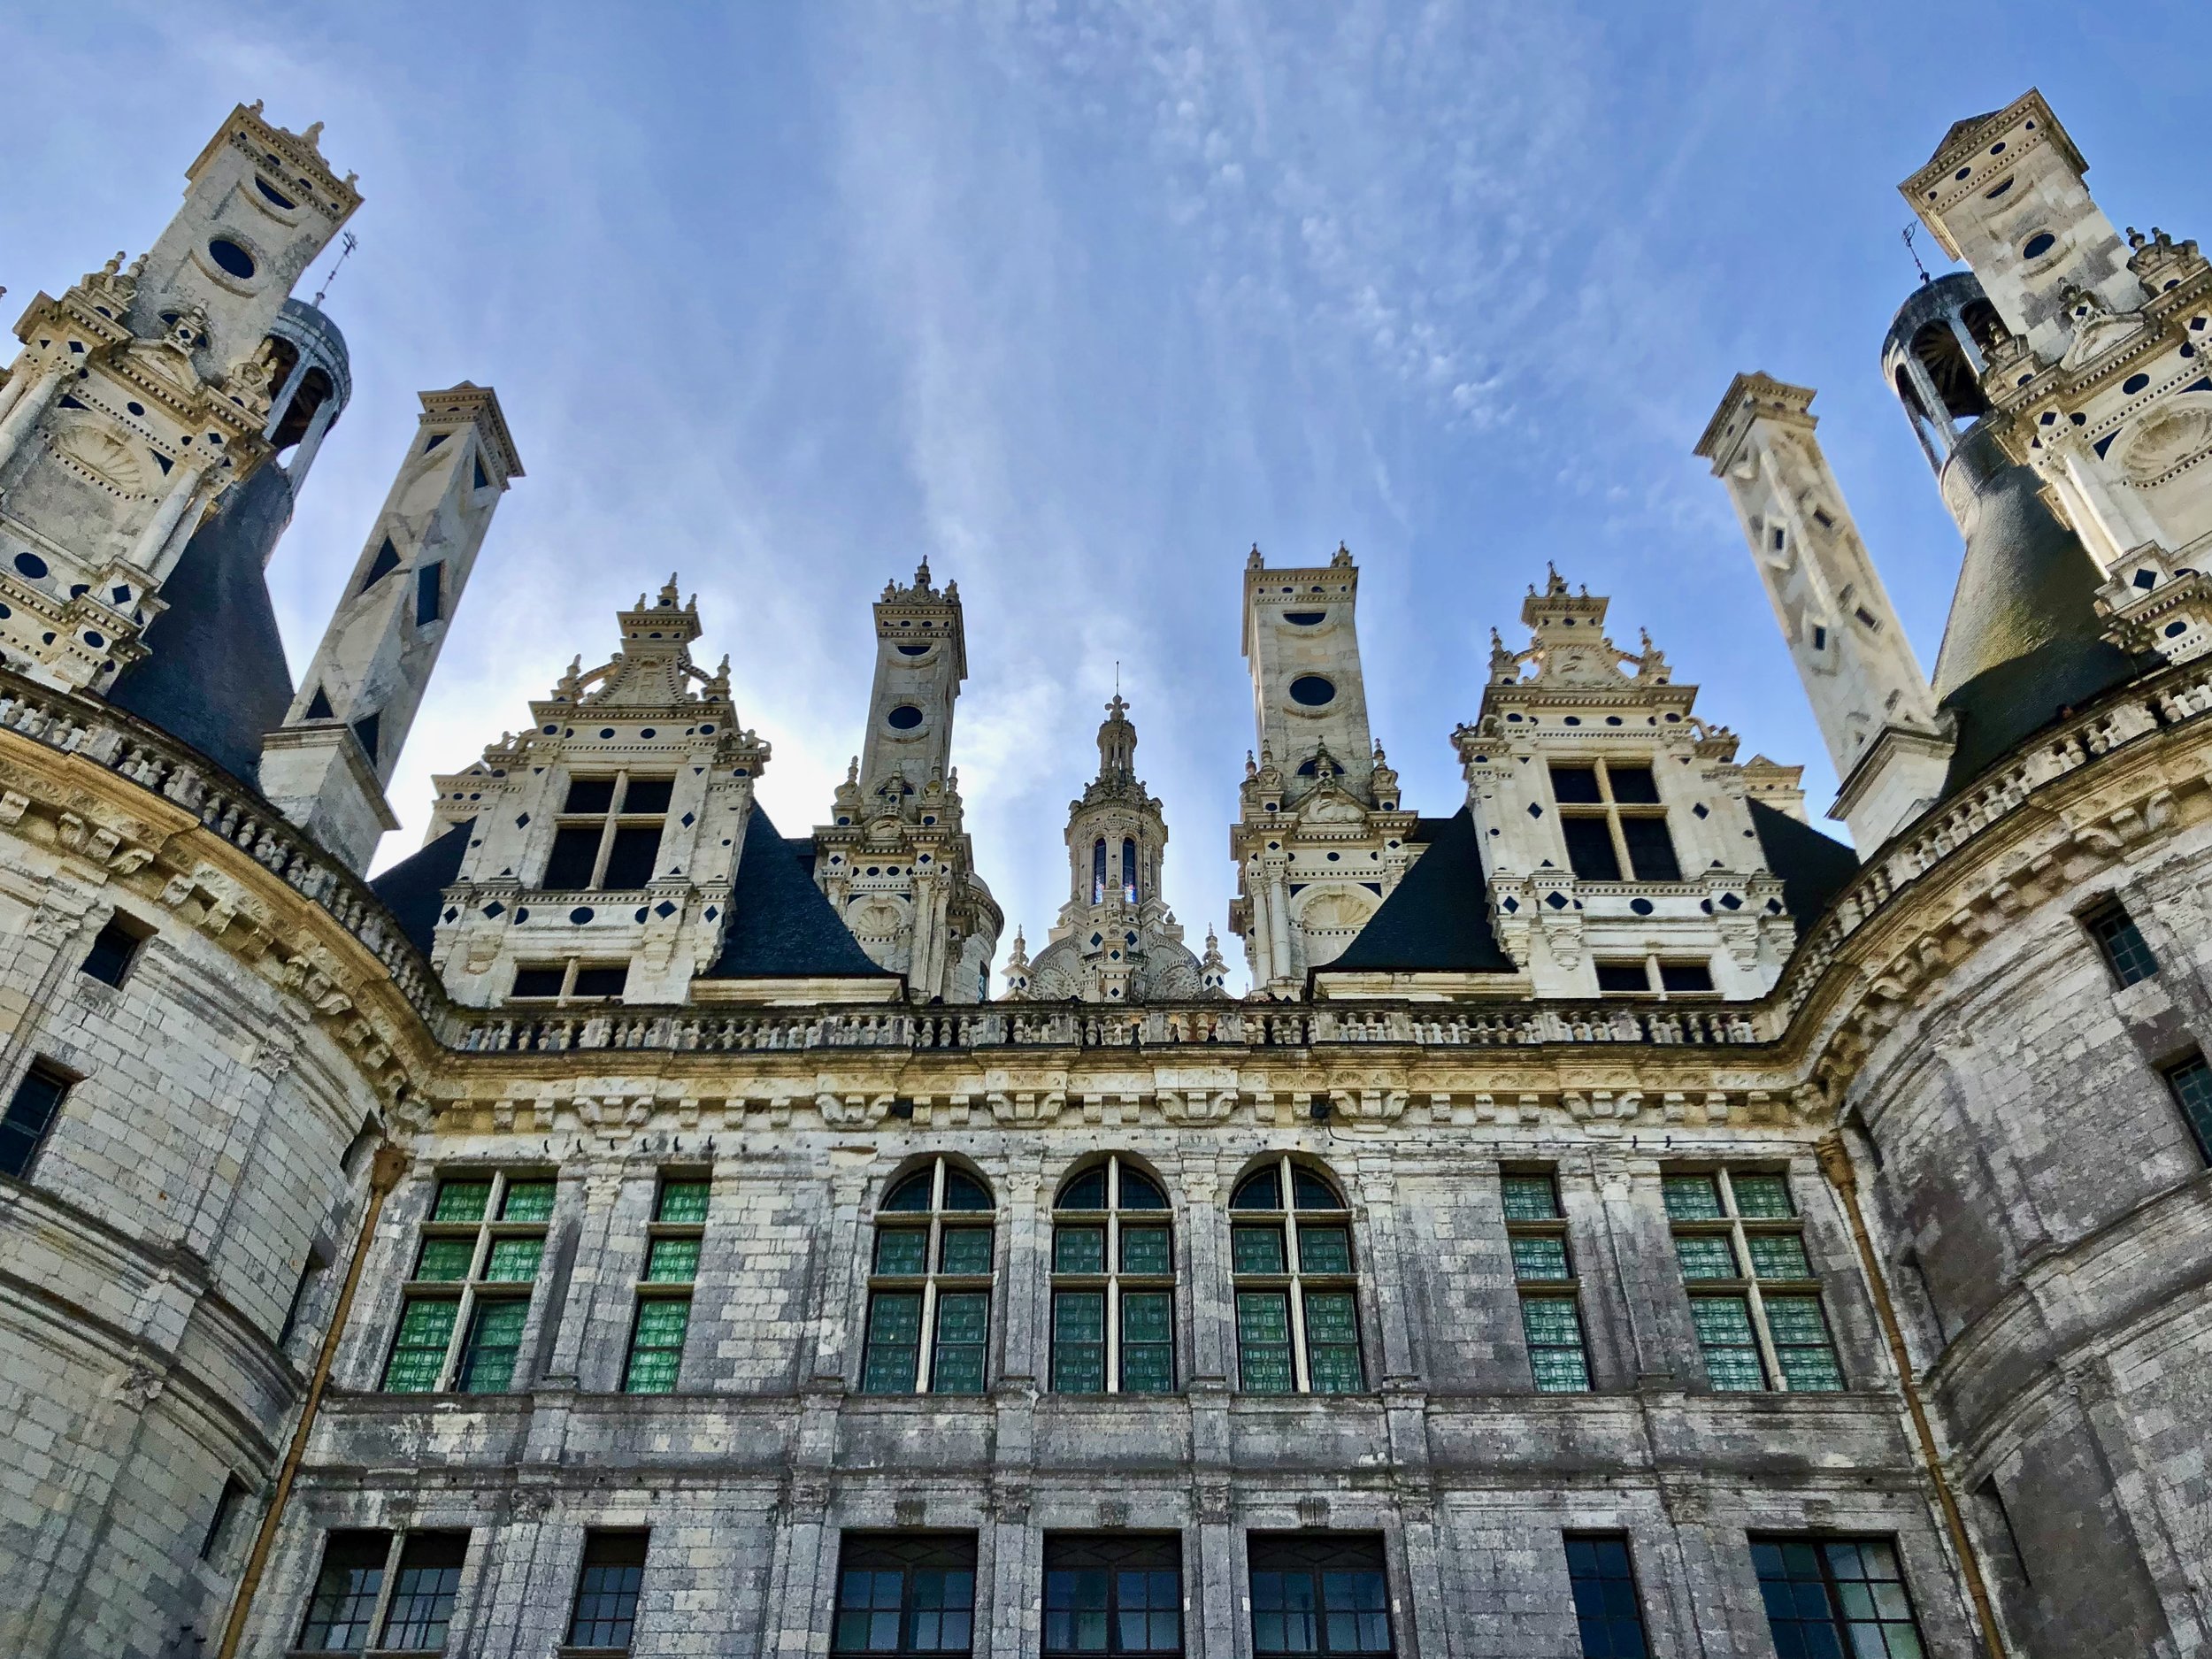 Touring Chateau de Chambord, a place so elaborate it makes Downton Abbey  look down at heel!